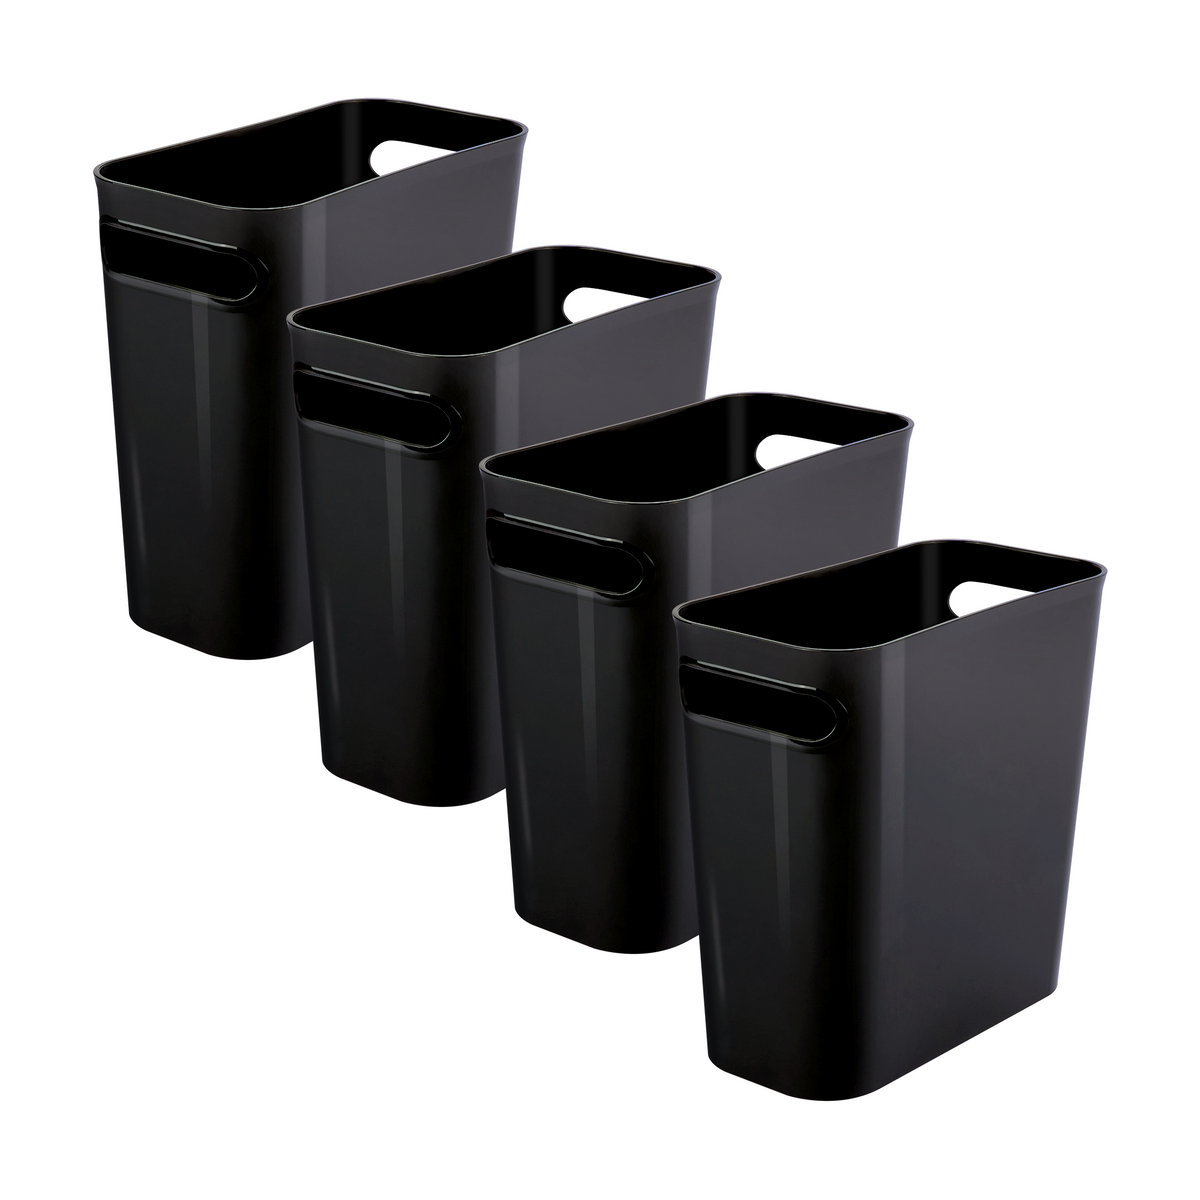 Mop Mob Space-Saving Trash Can and 100x 4 gal. Leak-Proof Liners Set. Small Black Plastic Wastebasket and Clear Bags Great for Bathroom, Kitchen or